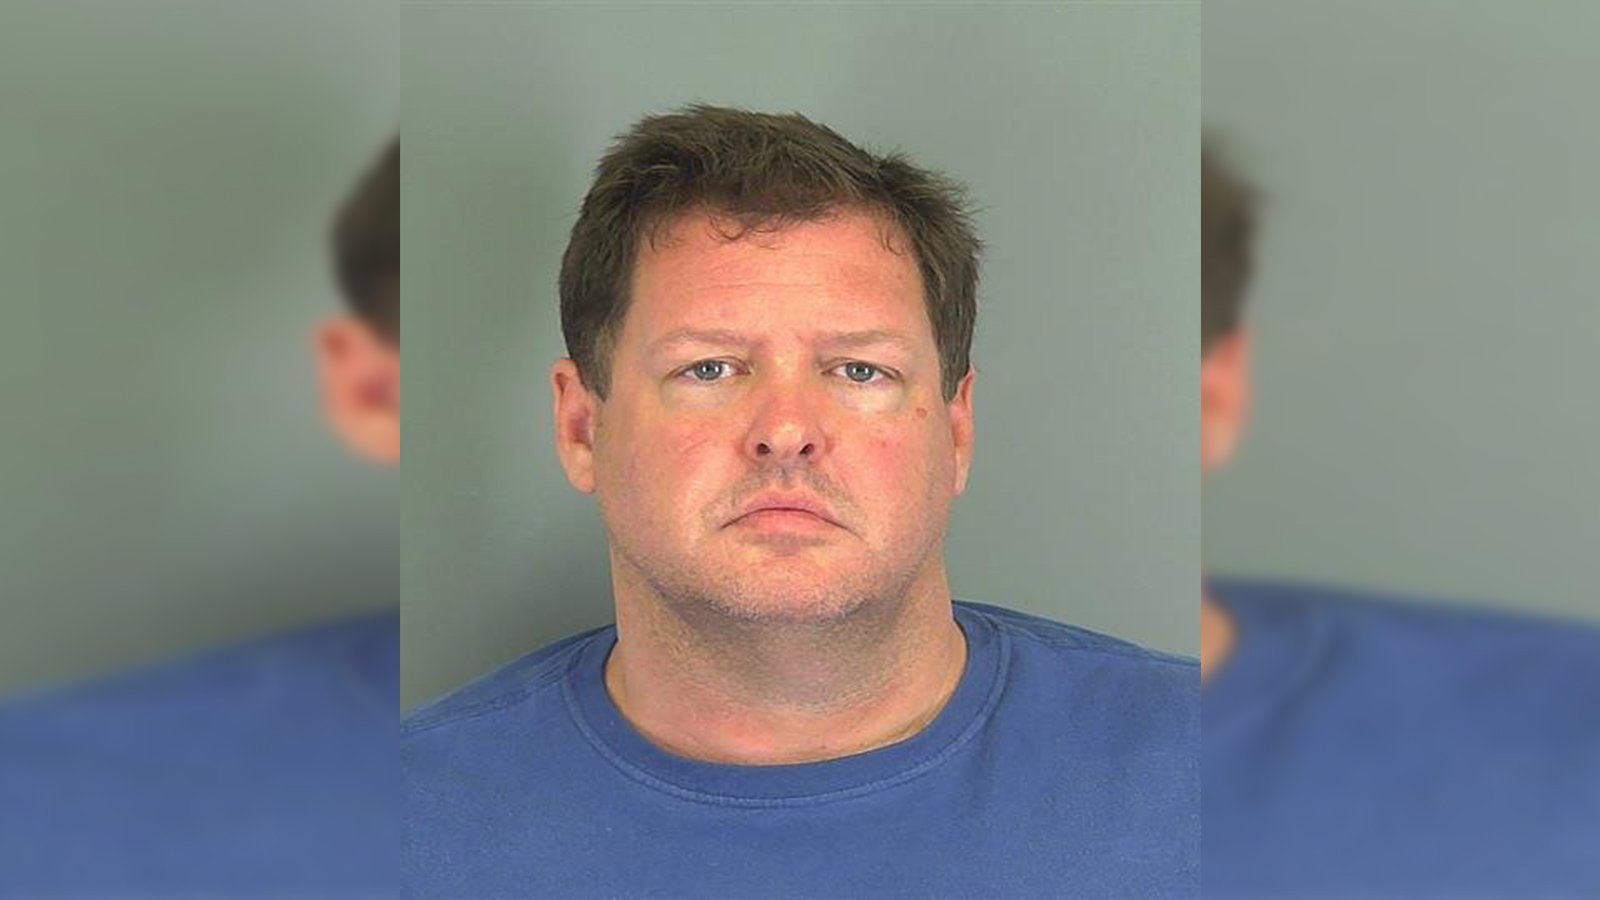 Authorities have found a third body on the property of Todd Kohlhepp, the South Carolina real estate agent accused of murder and kidnapping.